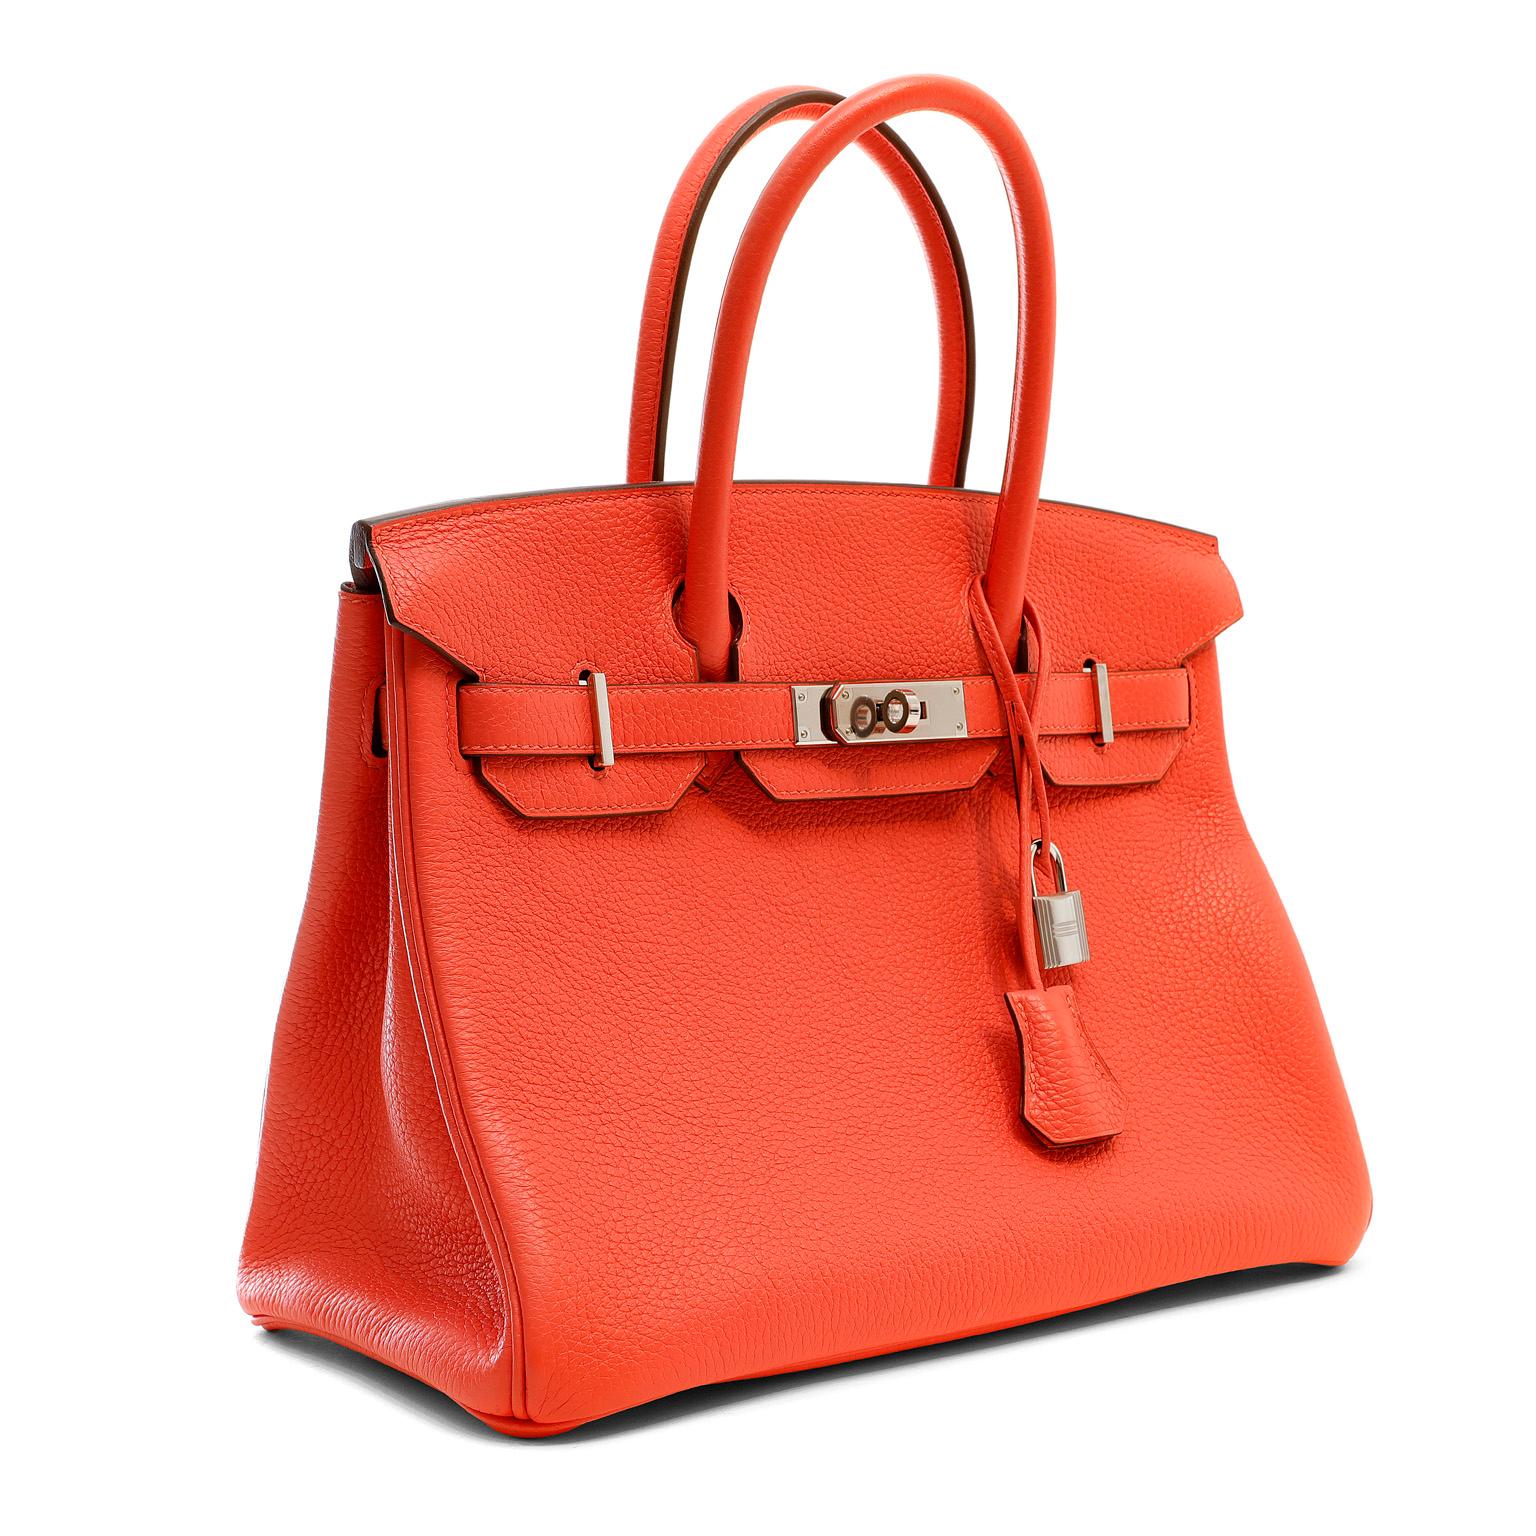 This authentic Hermès Raspberry Clemence 30 cm Birkin is in pristine condition with the protective plastic on the hardware.  Hermès bags are considered the ultimate luxury item the world over.  Hand stitched by skilled craftsmen, wait lists of a